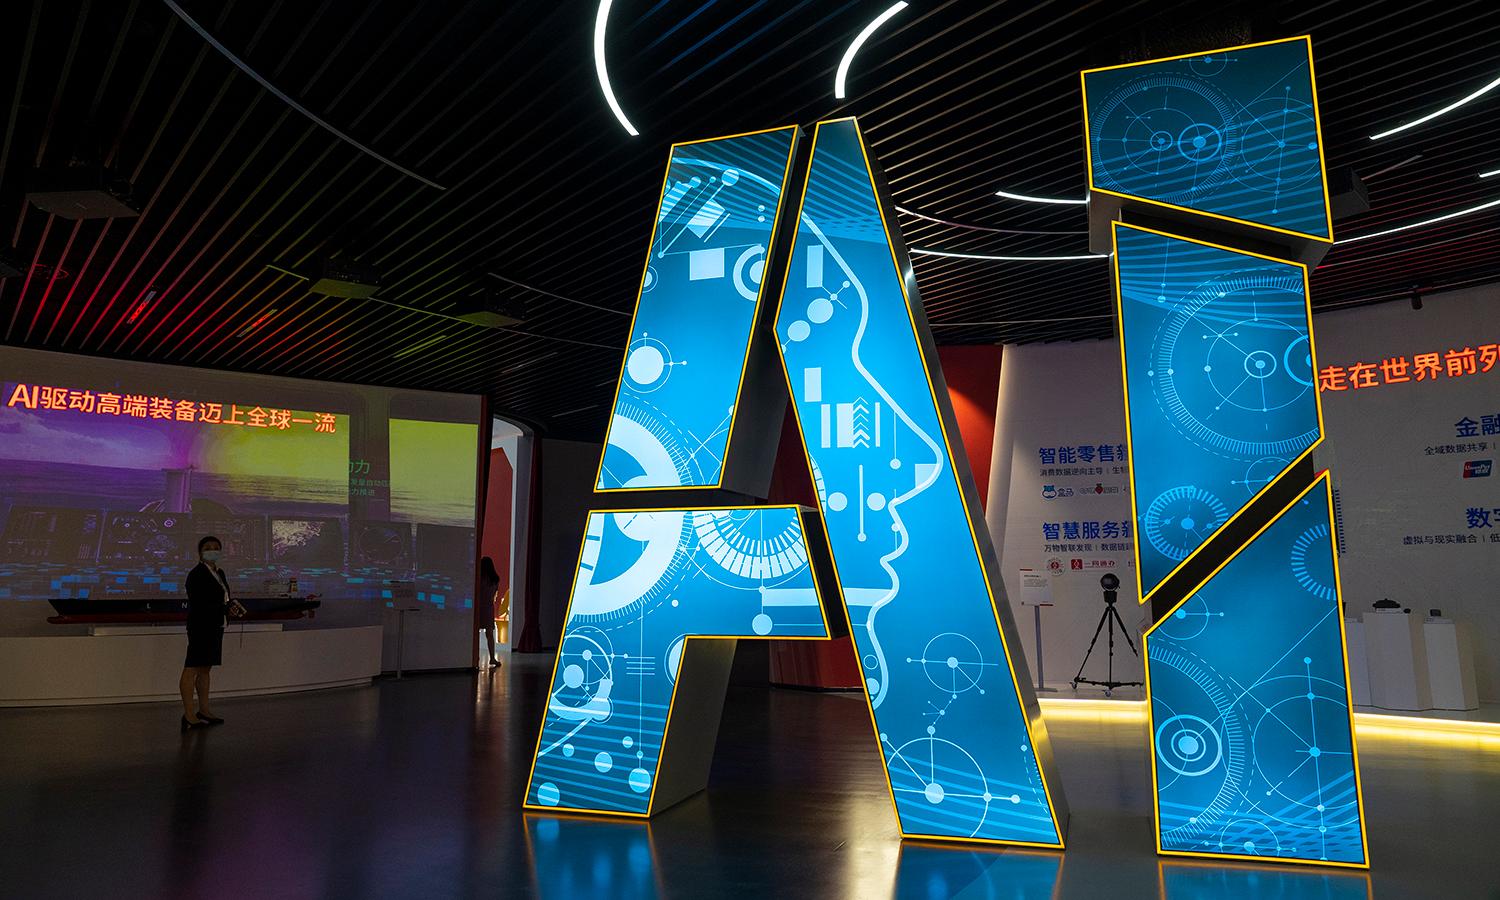 Cutting-edge applications of artificial intelligence are seen on display at the Artificial Intelligence Pavilion of Zhangjiang Future Park during a state-organized media tour on June 18, 2021, in Shanghai, China. (Photo by Andrea Verdelli/Getty Images)